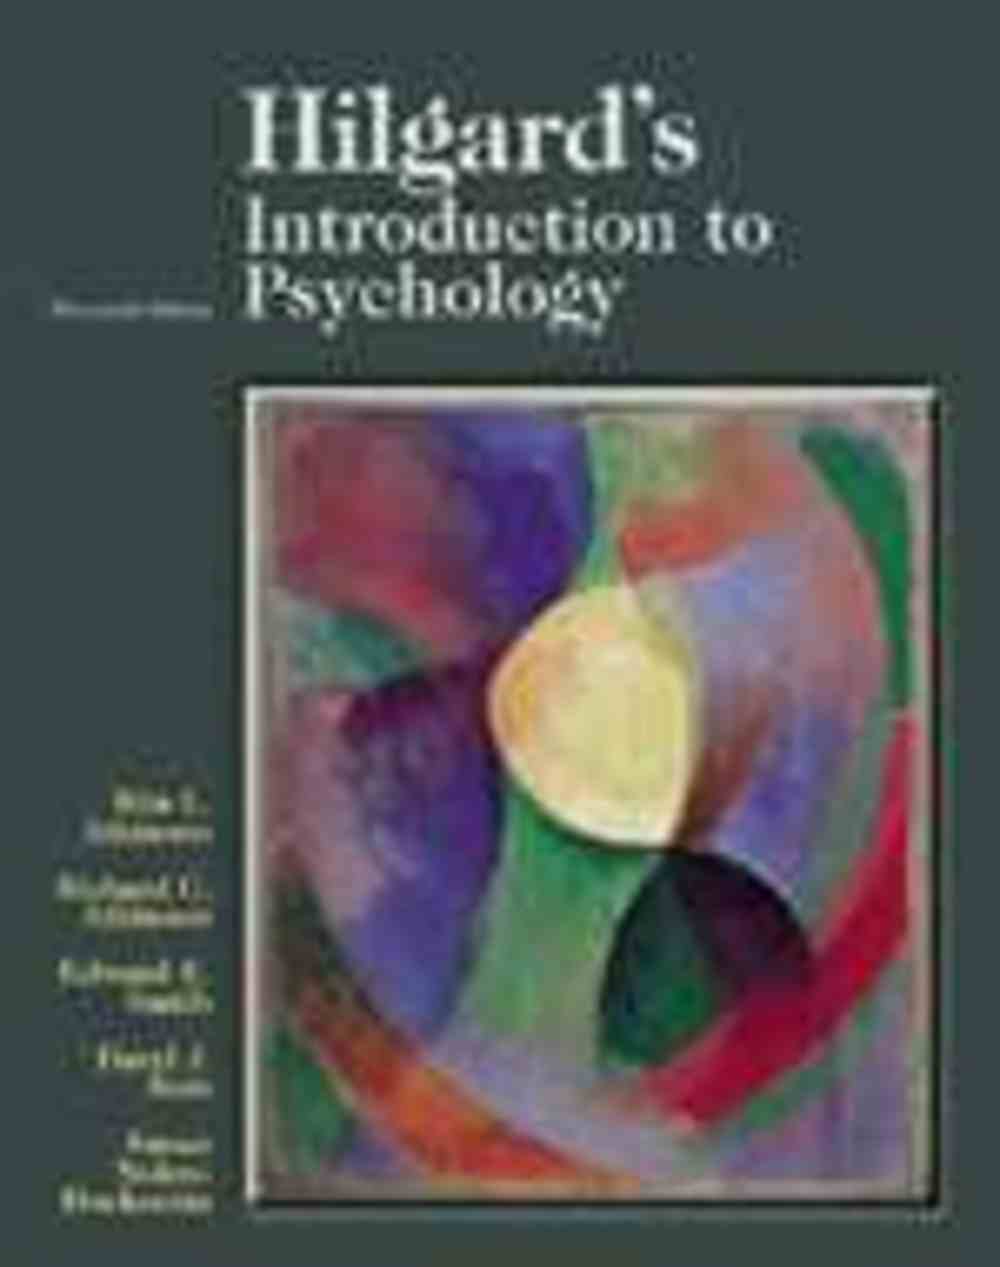 Introduction to Psychology (13th Edition) by Rita L Atkinson Koorong